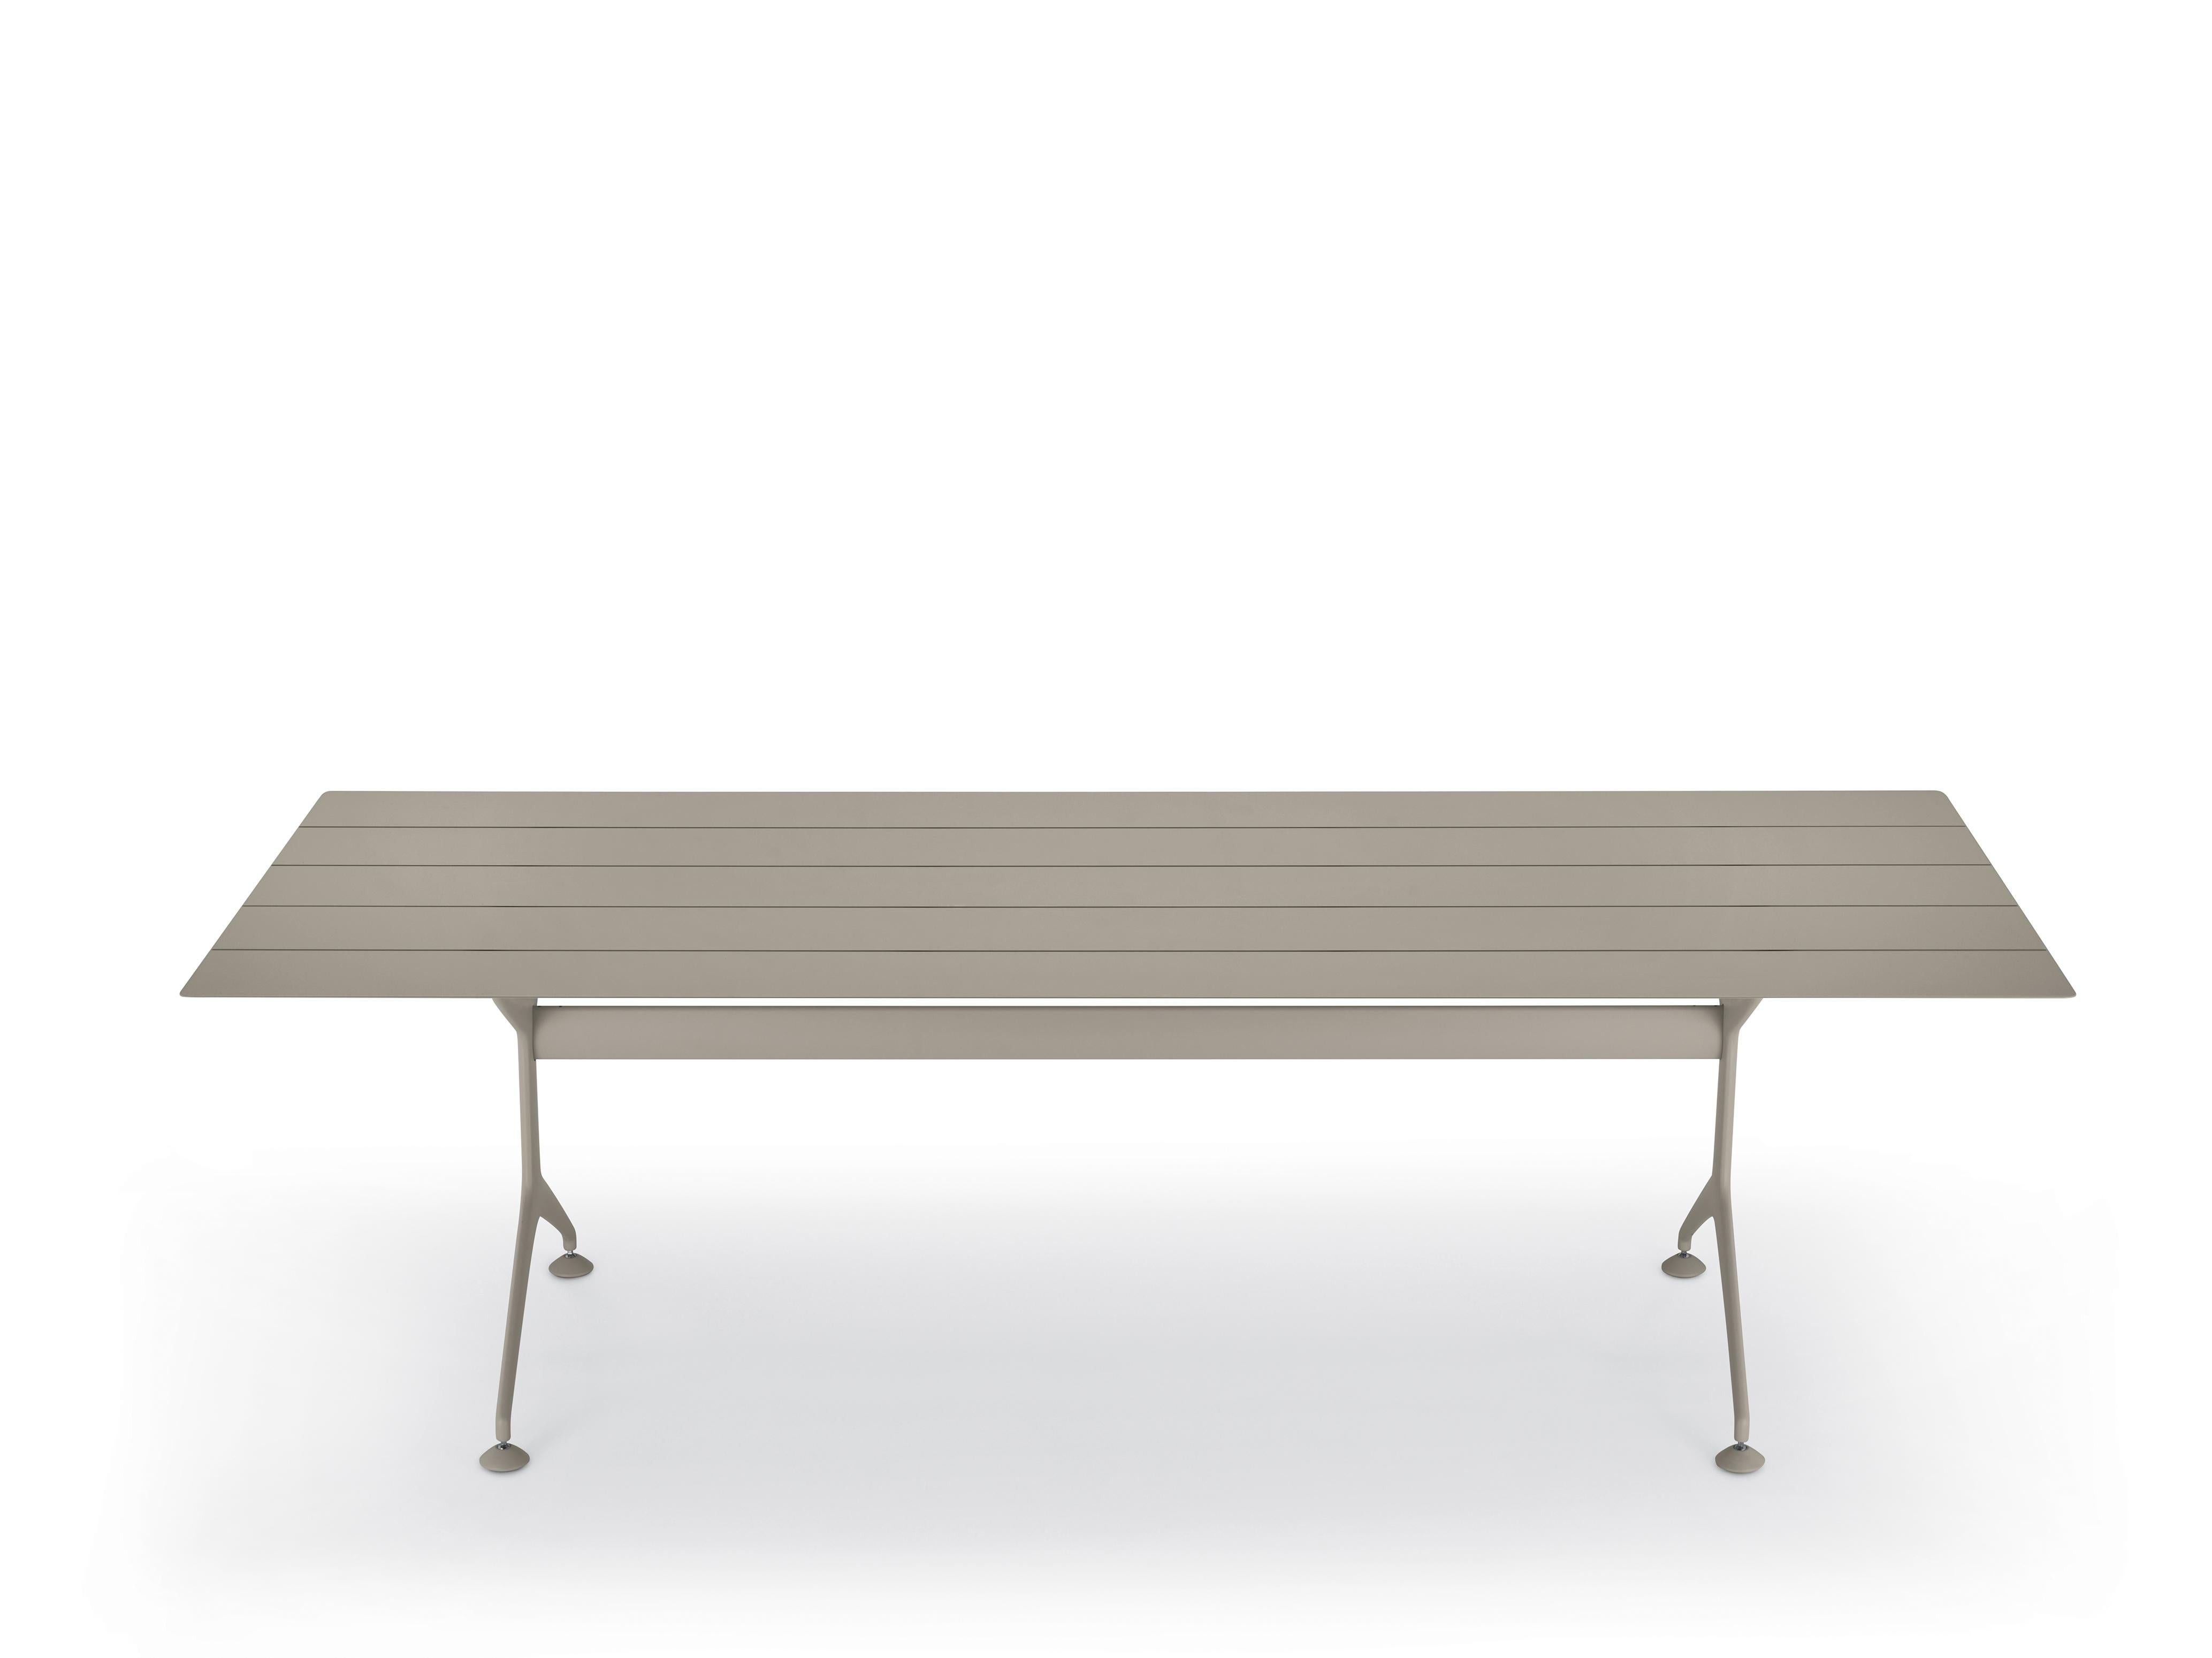 Alias 240 Outdoor Frametable in Sand Lacquered Aluminium Slats by Alberto Meda

Fixed table for outdoor use with structure made of lacquered die-cast aluminium elements. Top in lacquered extruded aluminium slats.

Born in Lenno Tremezzina